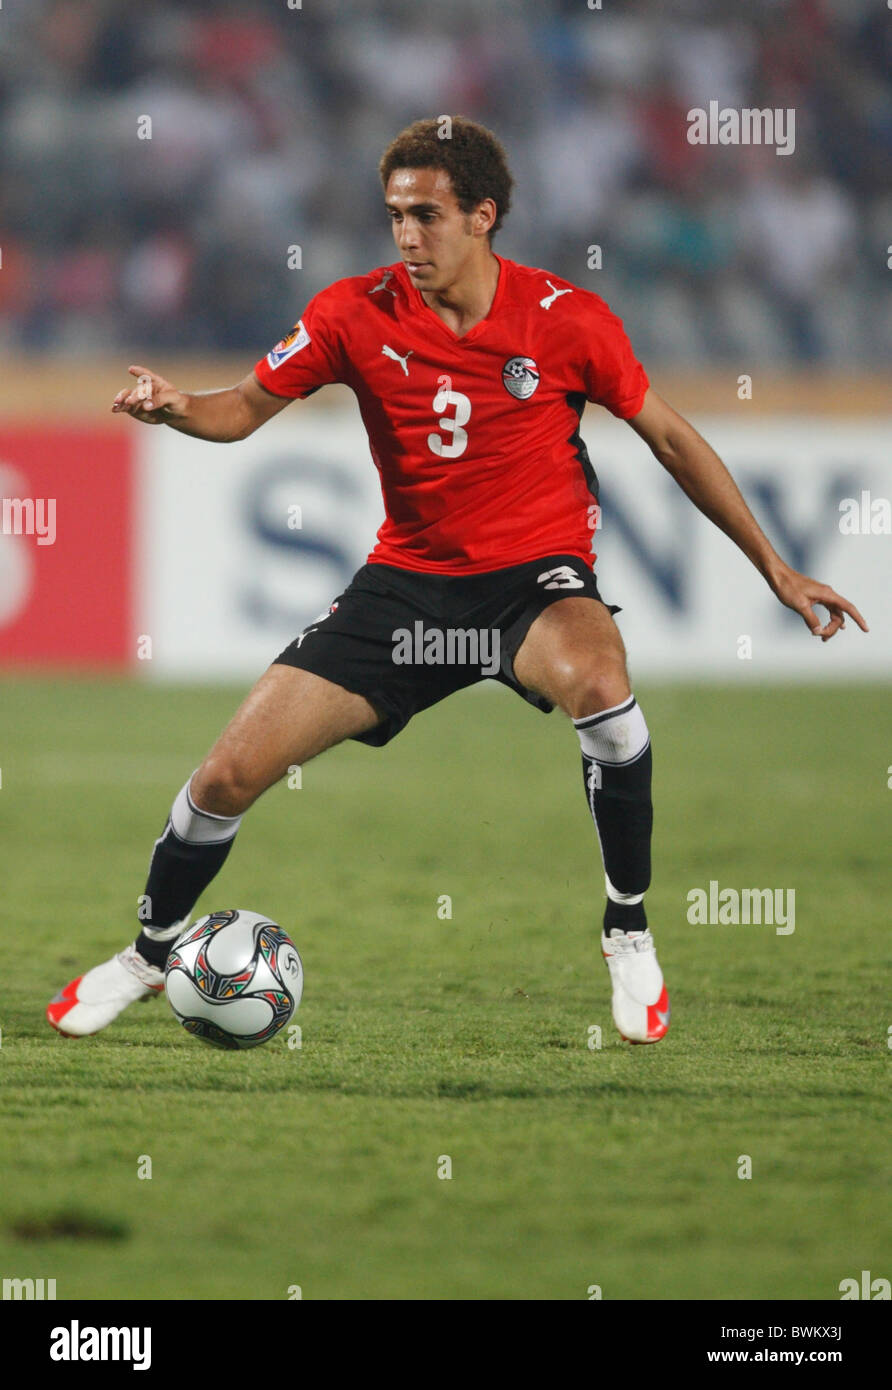 Hesham Mohamed of Egypt (3) in action during a FIFA U-20 World Cup Group A match against Italy October 1, 2009 Stock Photo